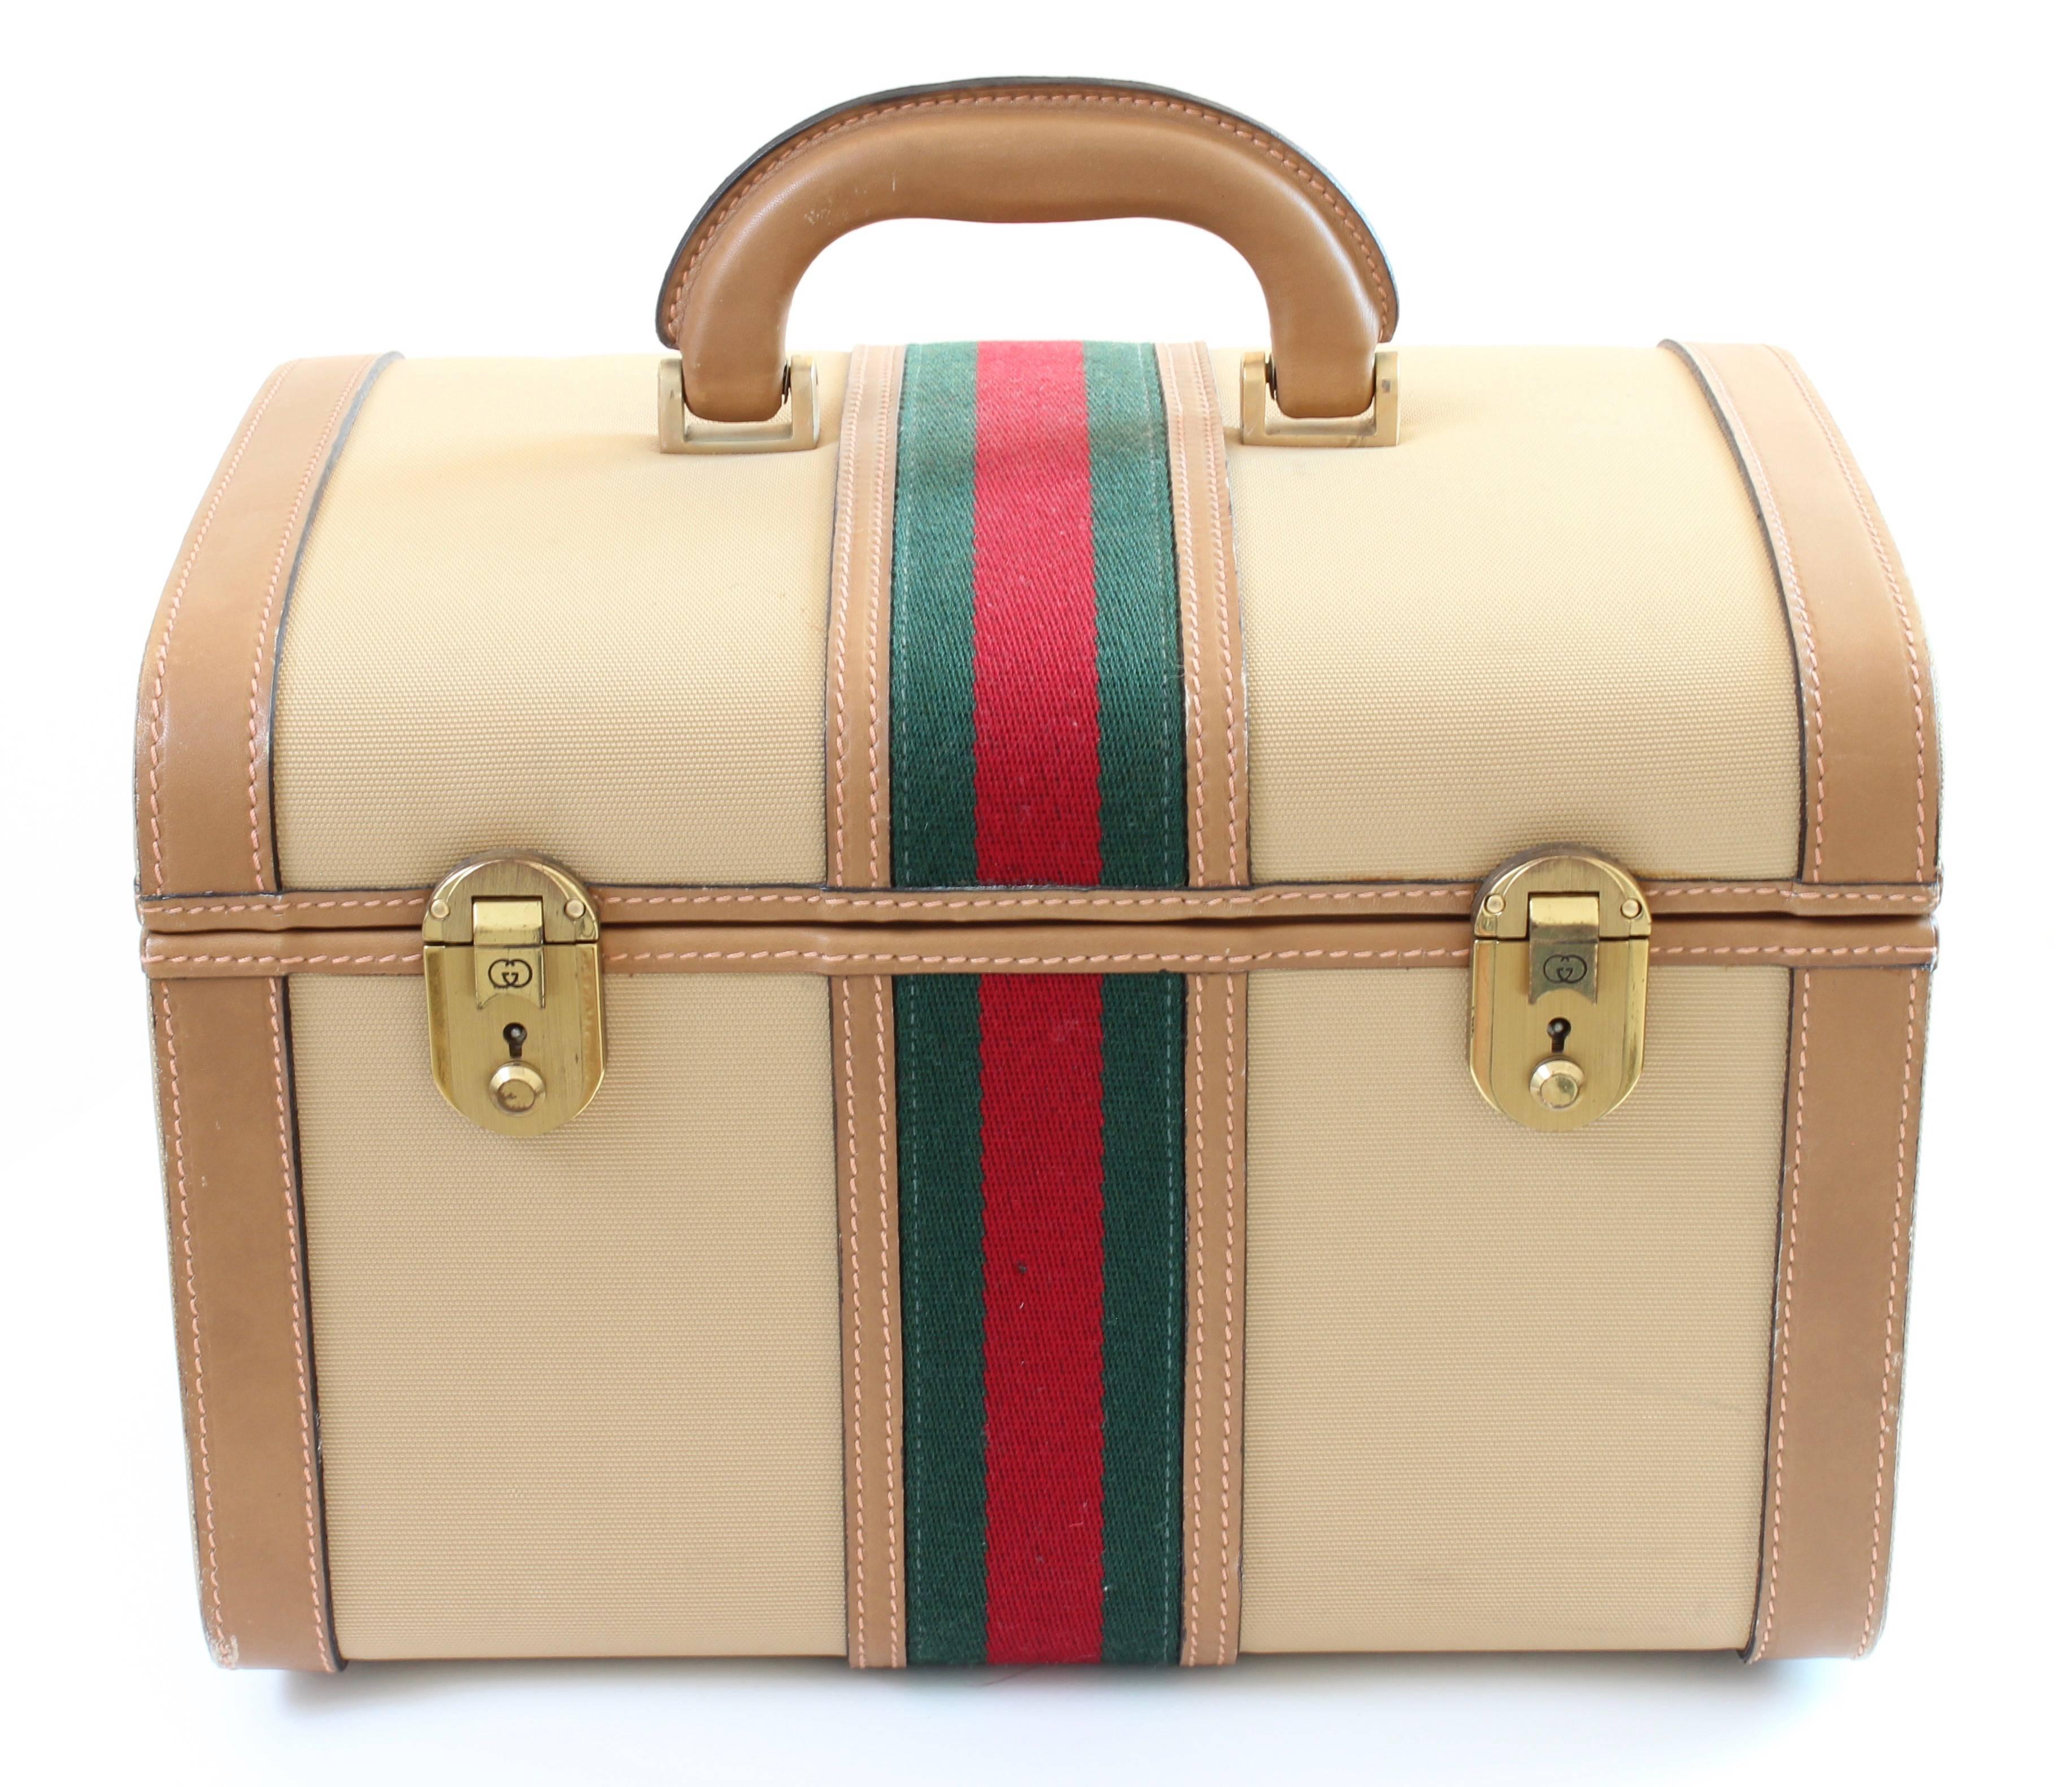 This vintage train case was made by Gucci in the late 1970s.  Made from beige canvas with tan leather trim, it features their signature red and green webbing at the center with gold hardware. The interior has a mirror, is fully-lined and has room